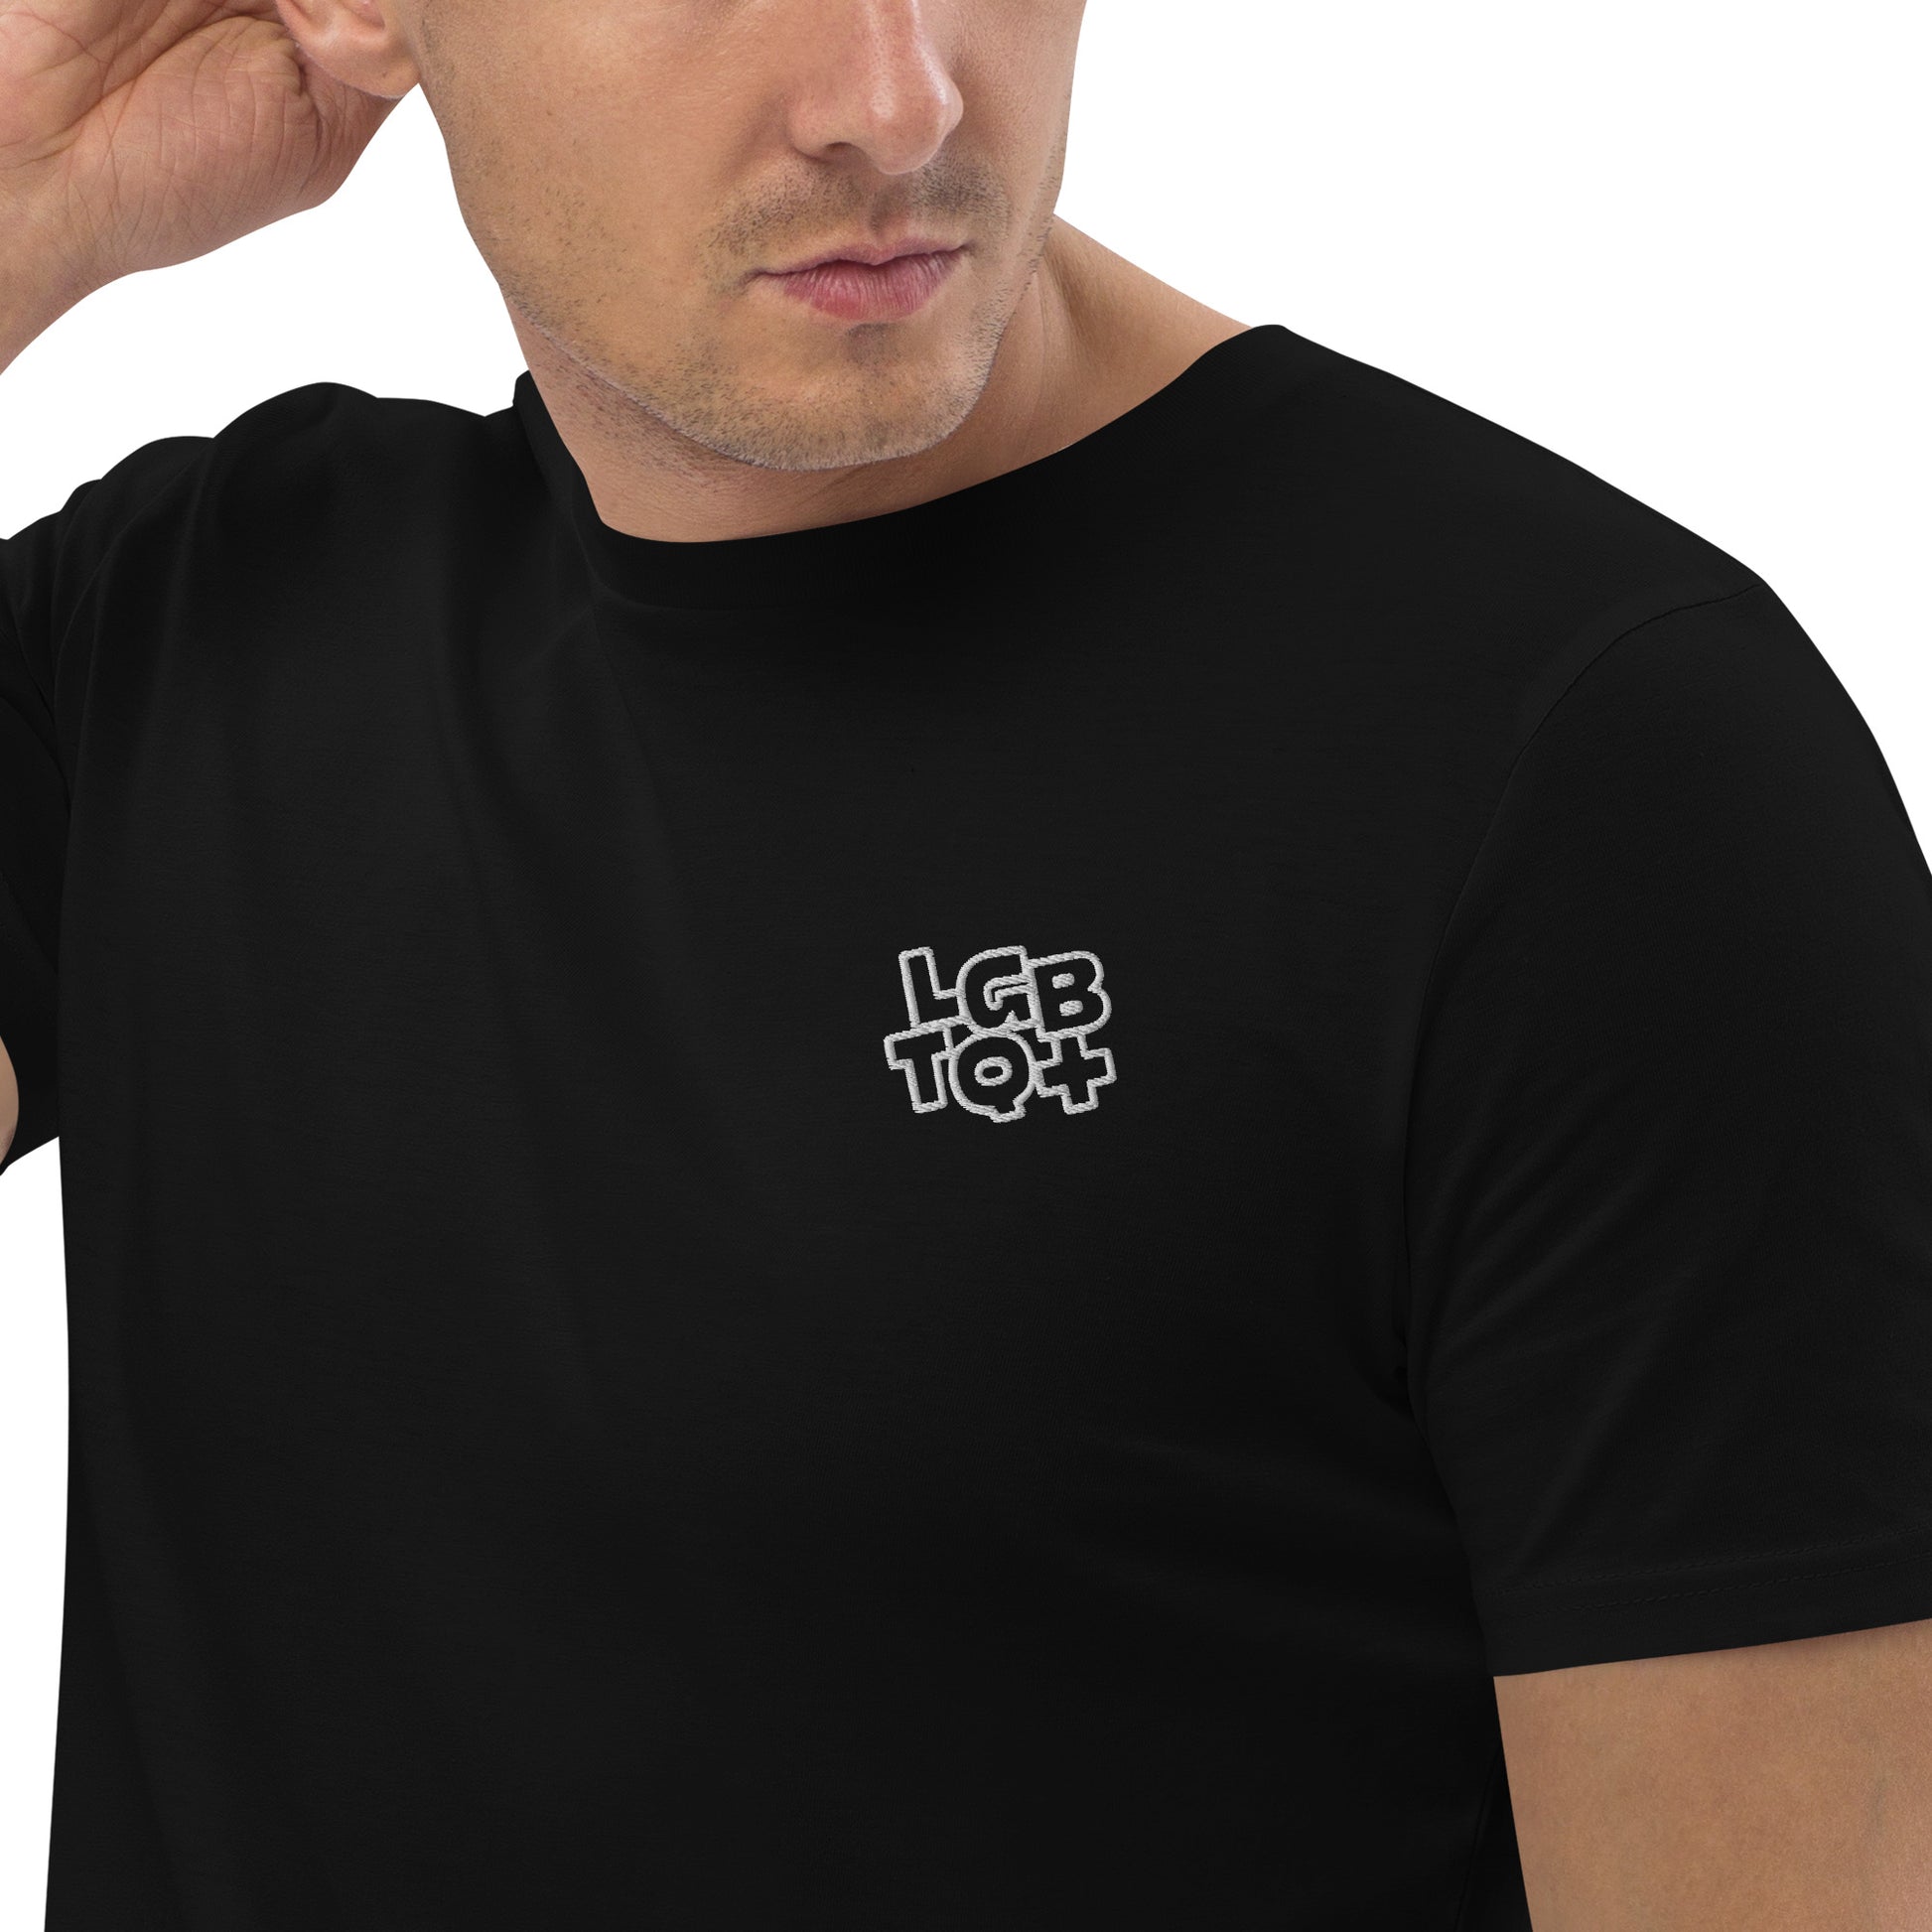 Male model wearing a fitted black organic cotton t-shirt with a small embroidered LGBTQ+ design on the left chest. Available in sizes S to 3XL.